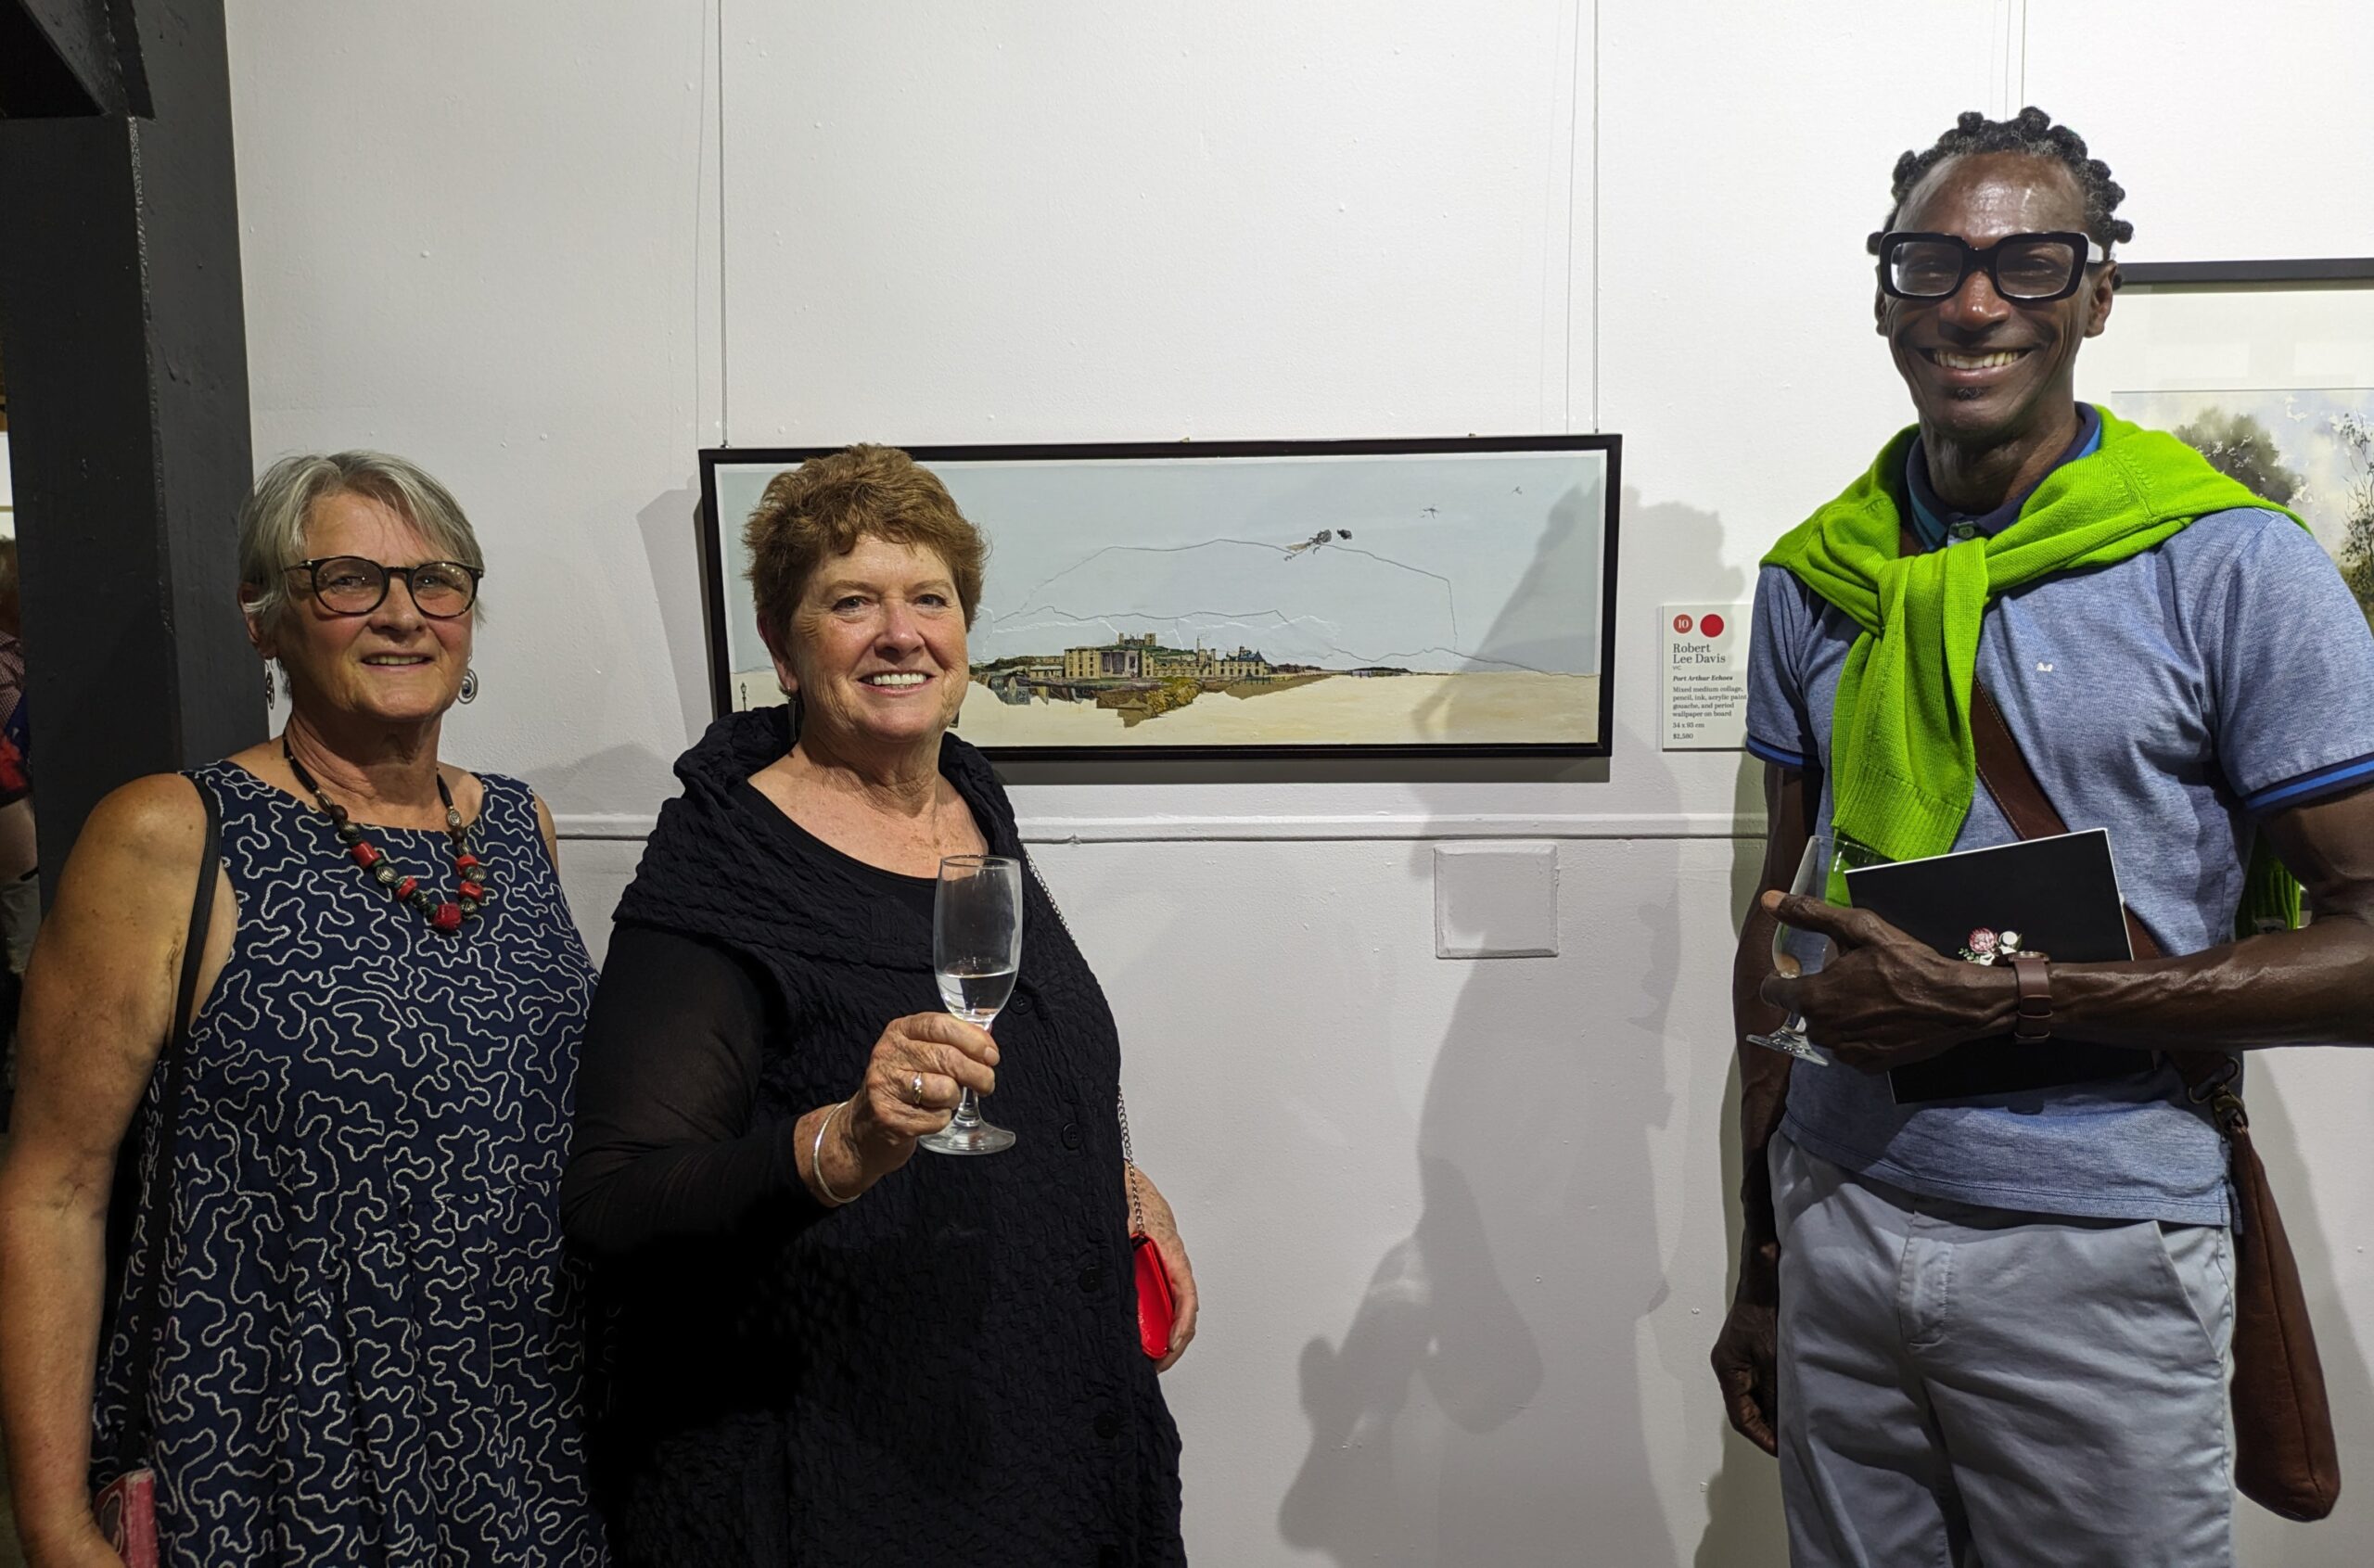 Robert Lee Davis beside his Glover Prize entry. With another finalist, Chantale Delrue and writer, Marjie Courtis